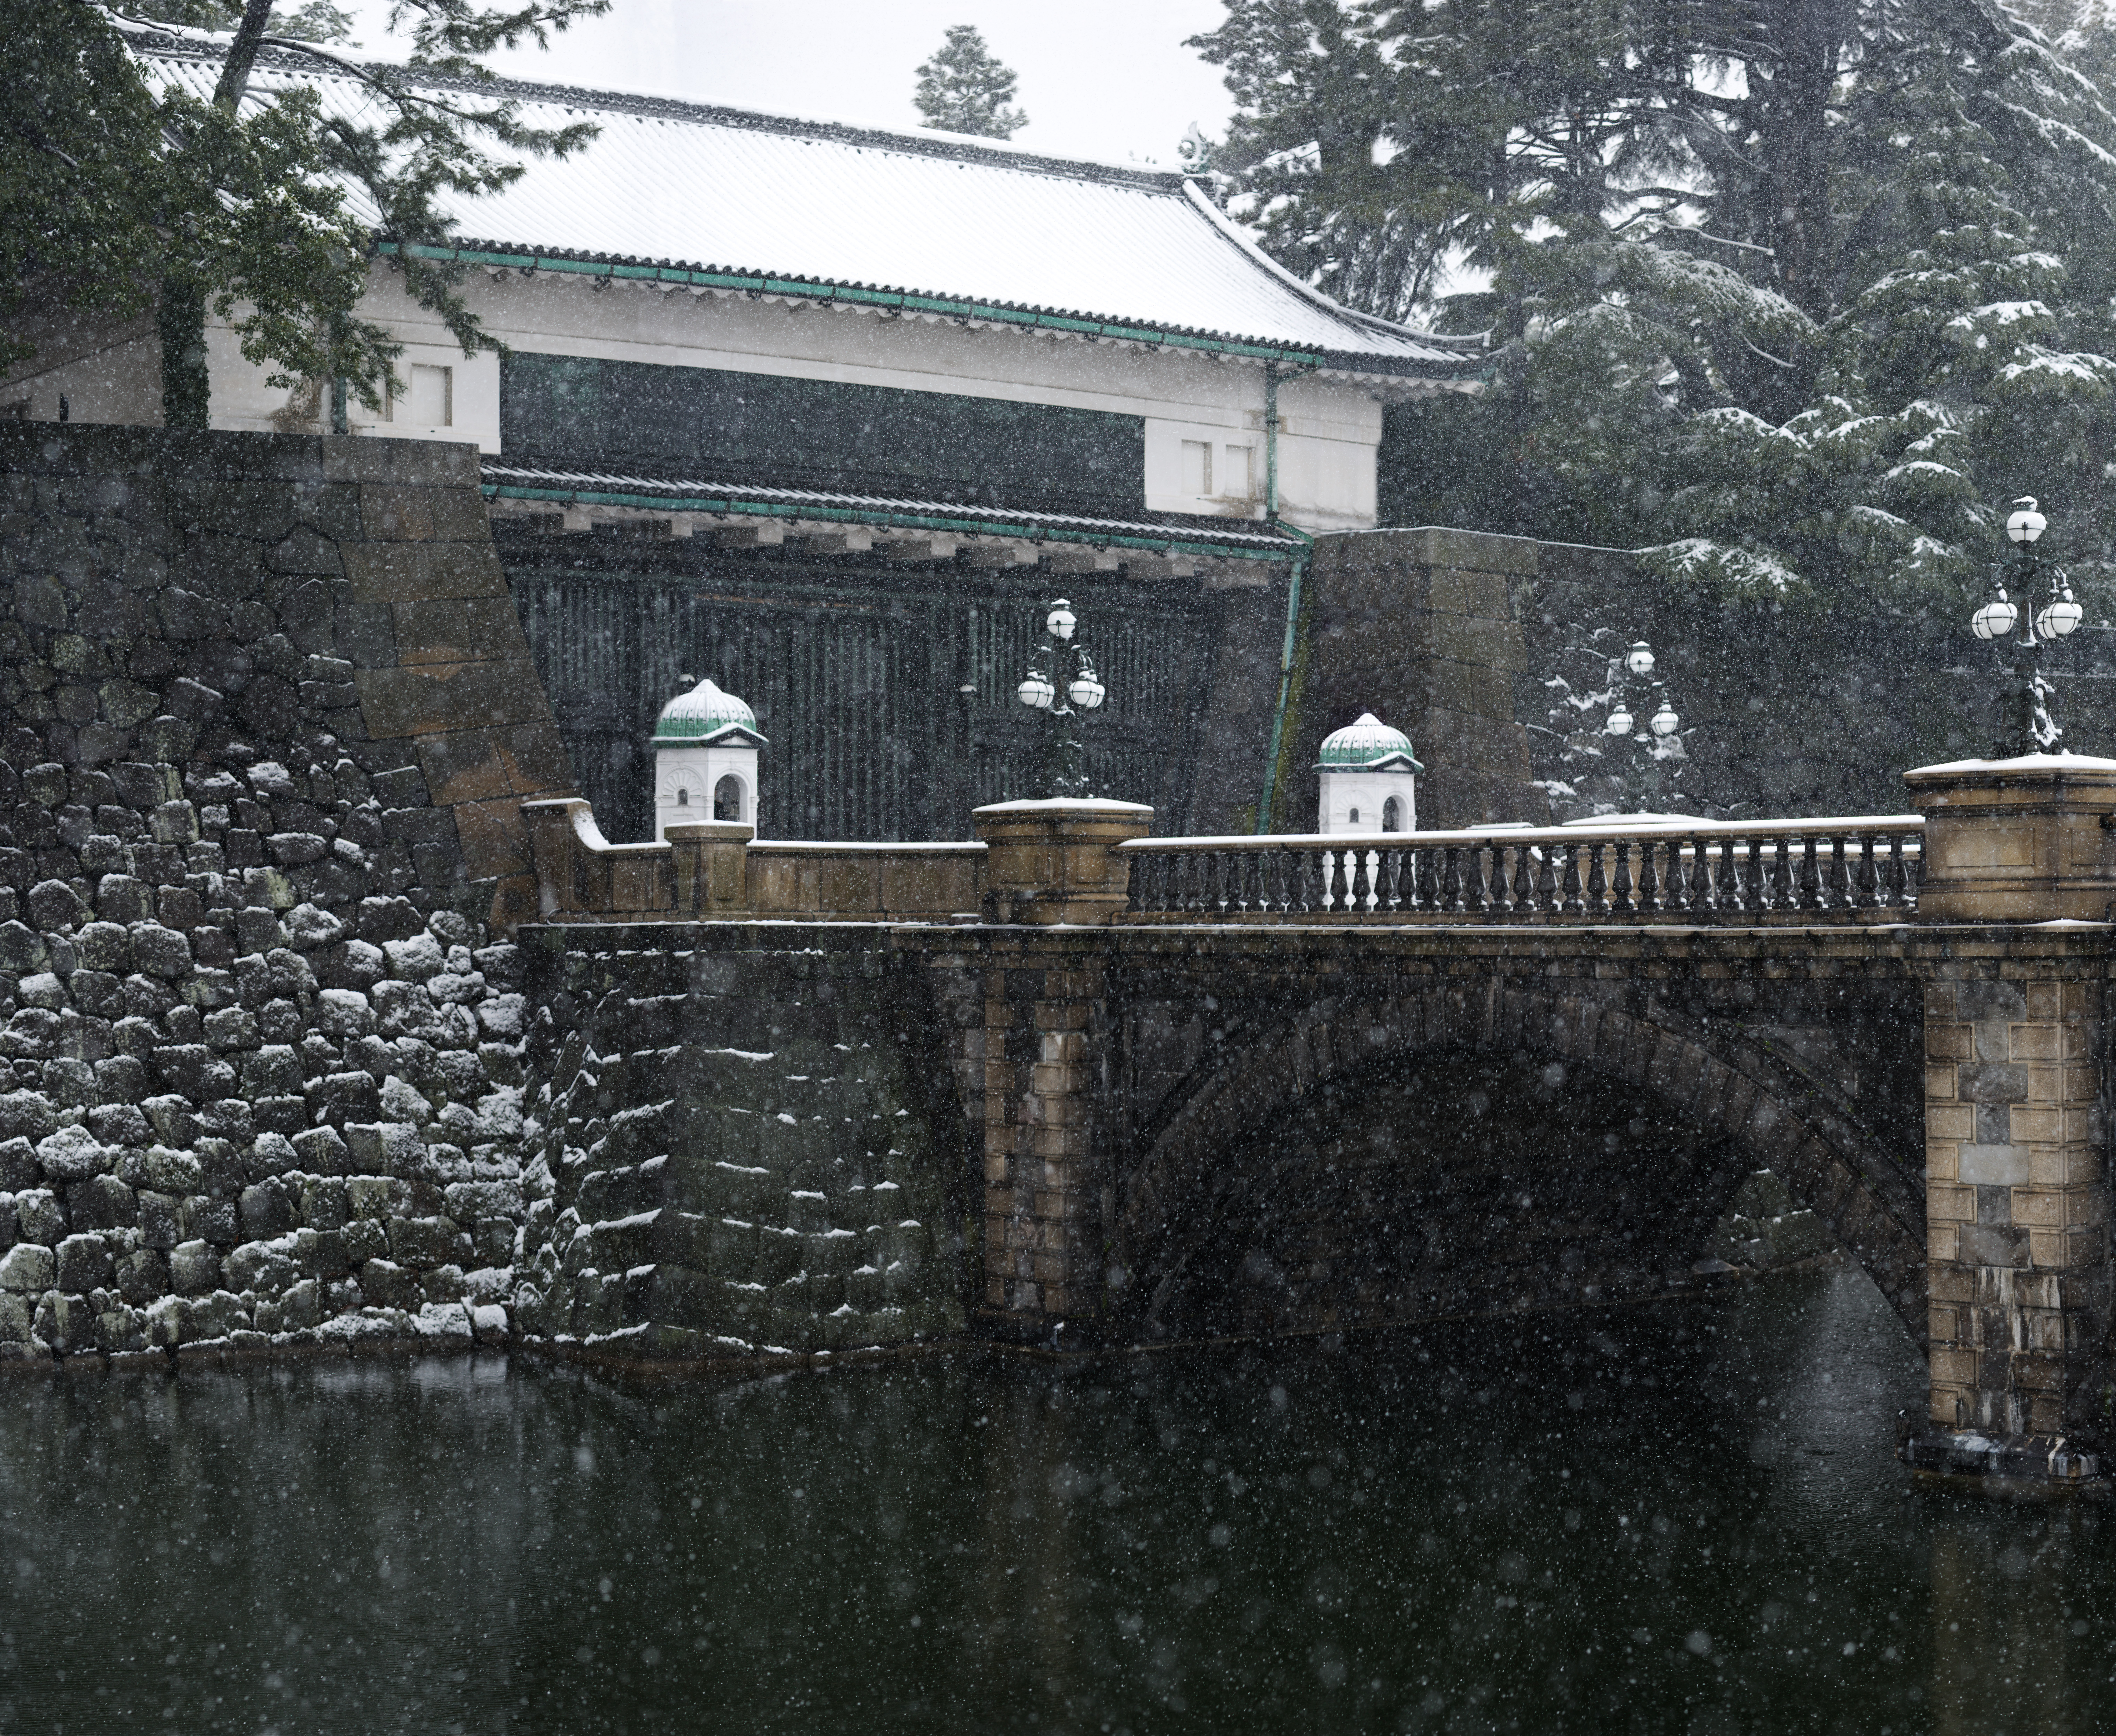 photo,material,free,landscape,picture,stock photo,Creative Commons,Snow Double Bridge, Moat, Palace, Imperial Guard, Snowfall